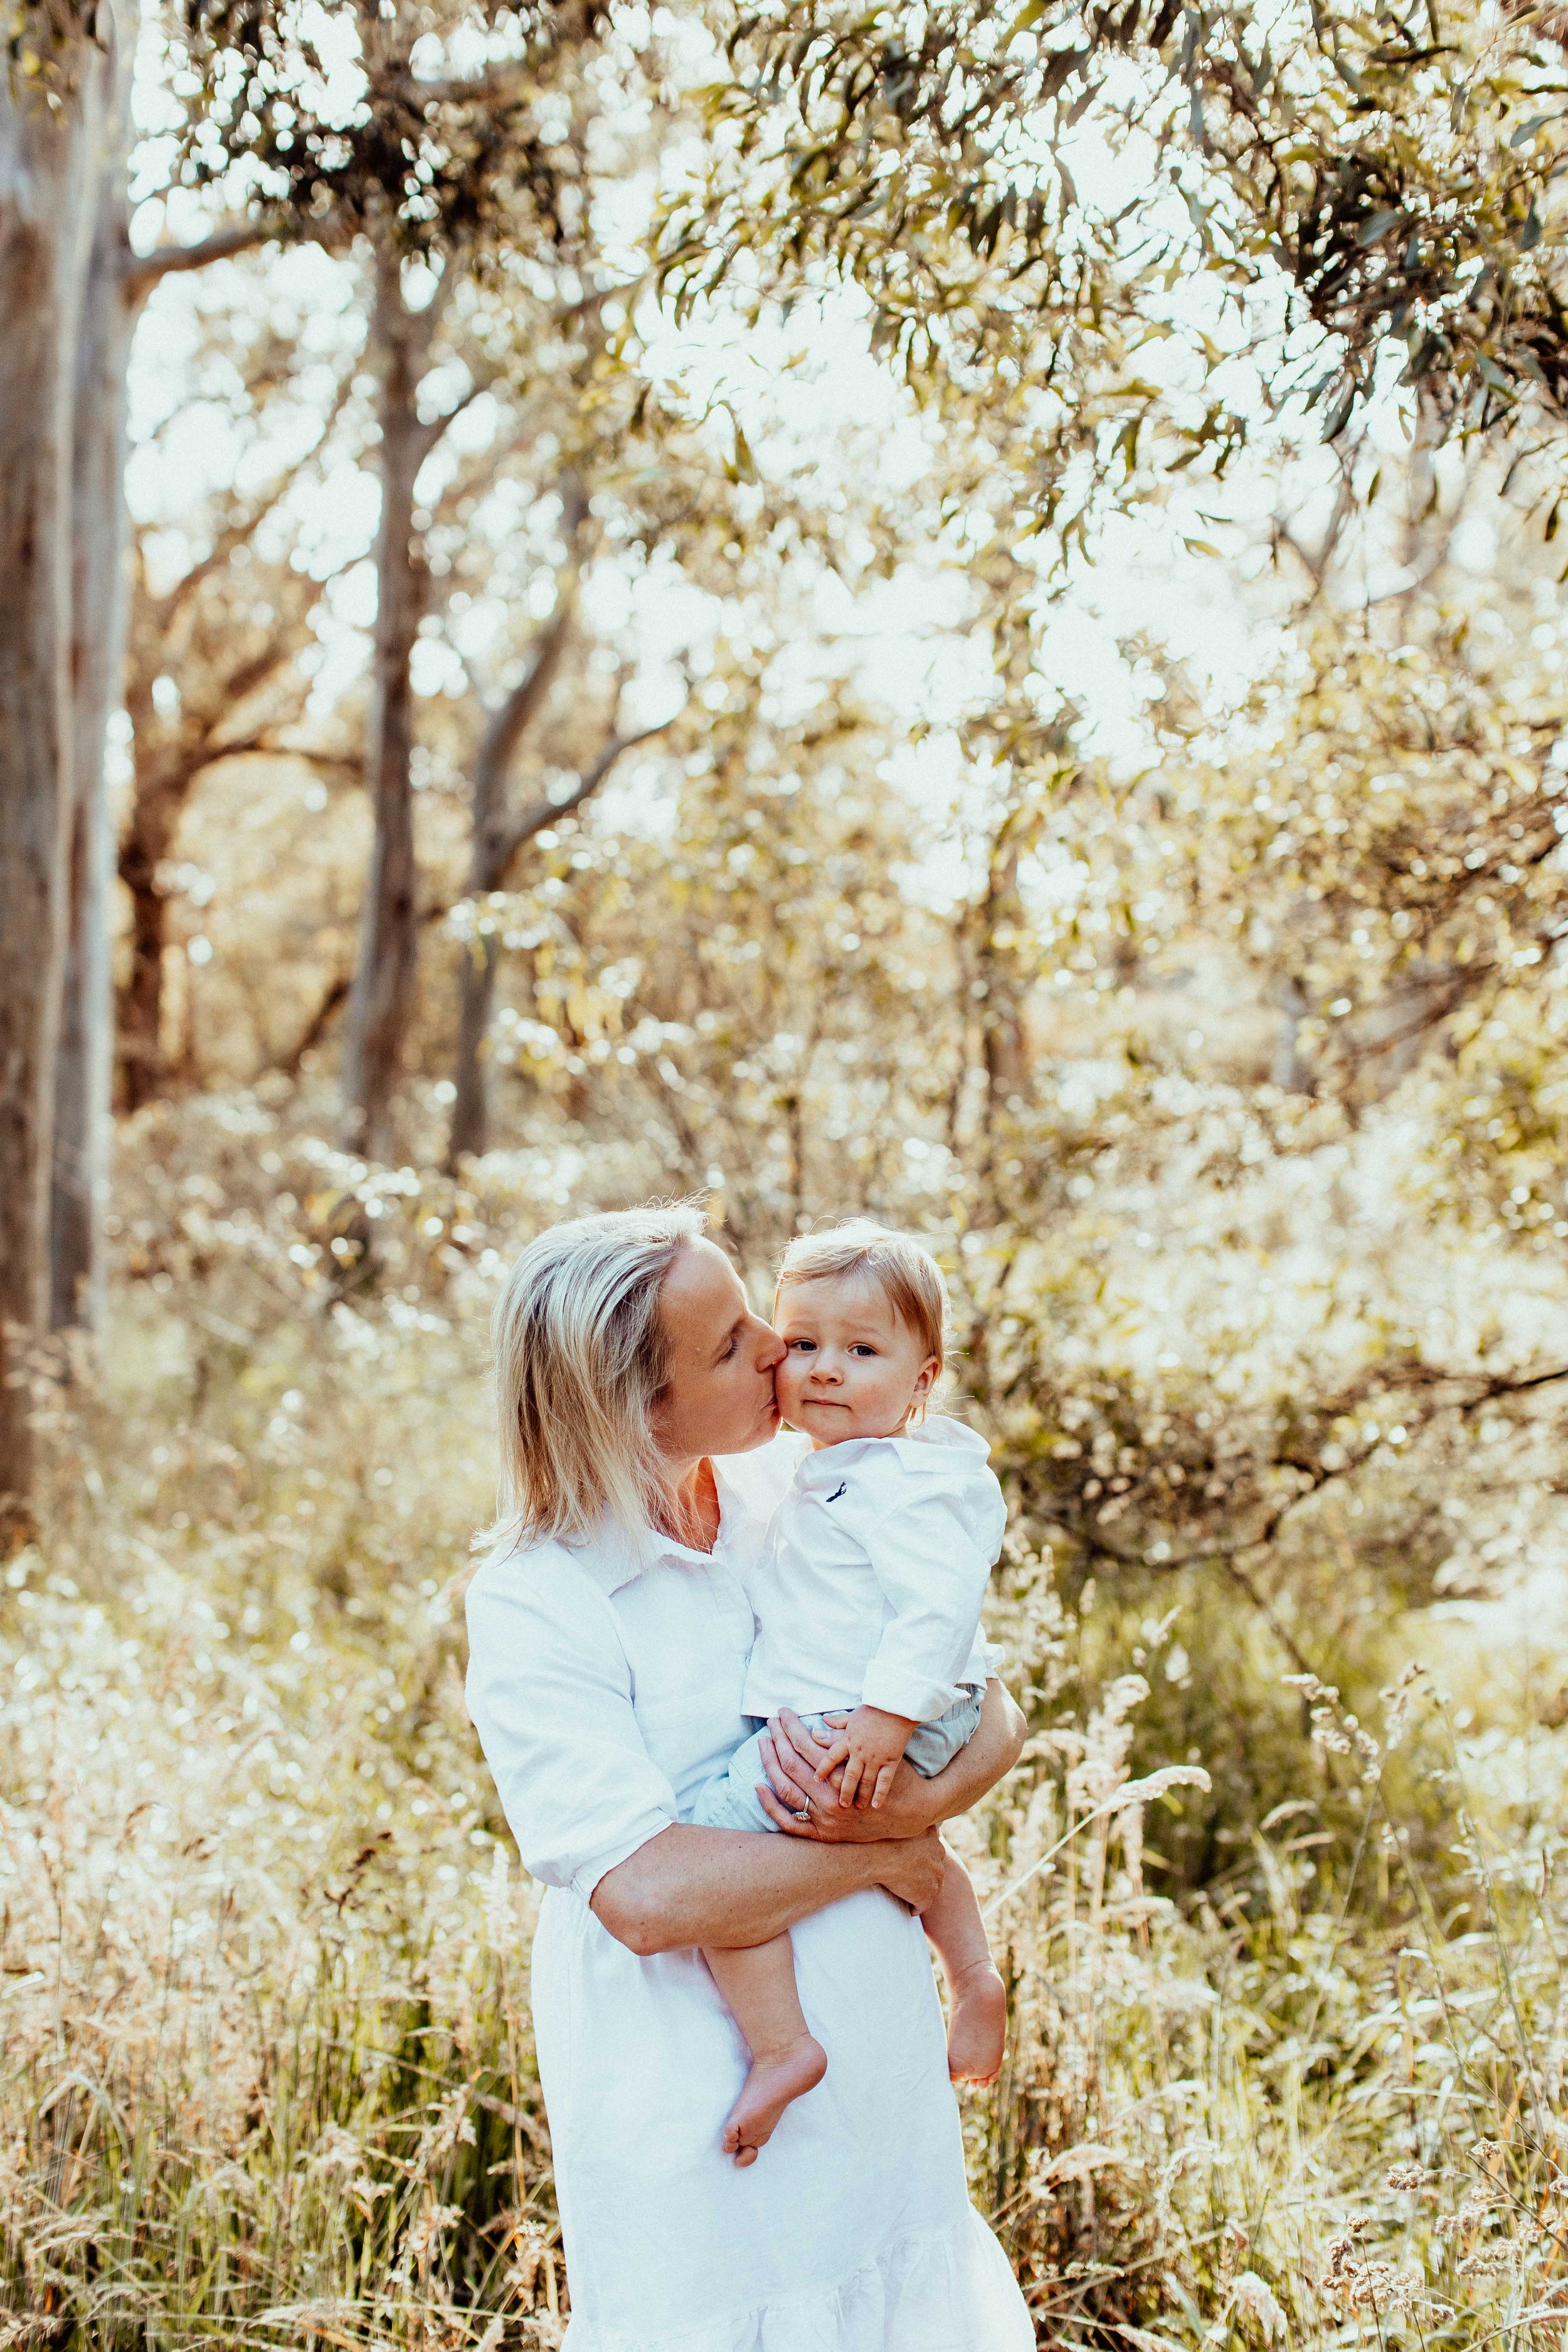 poole-family-bowral-southern-highlands-inhome-family-lifestyle-wollondilly-camden-macarthur-sydney-photography-www.emilyobrienphotography.net-15.jpg